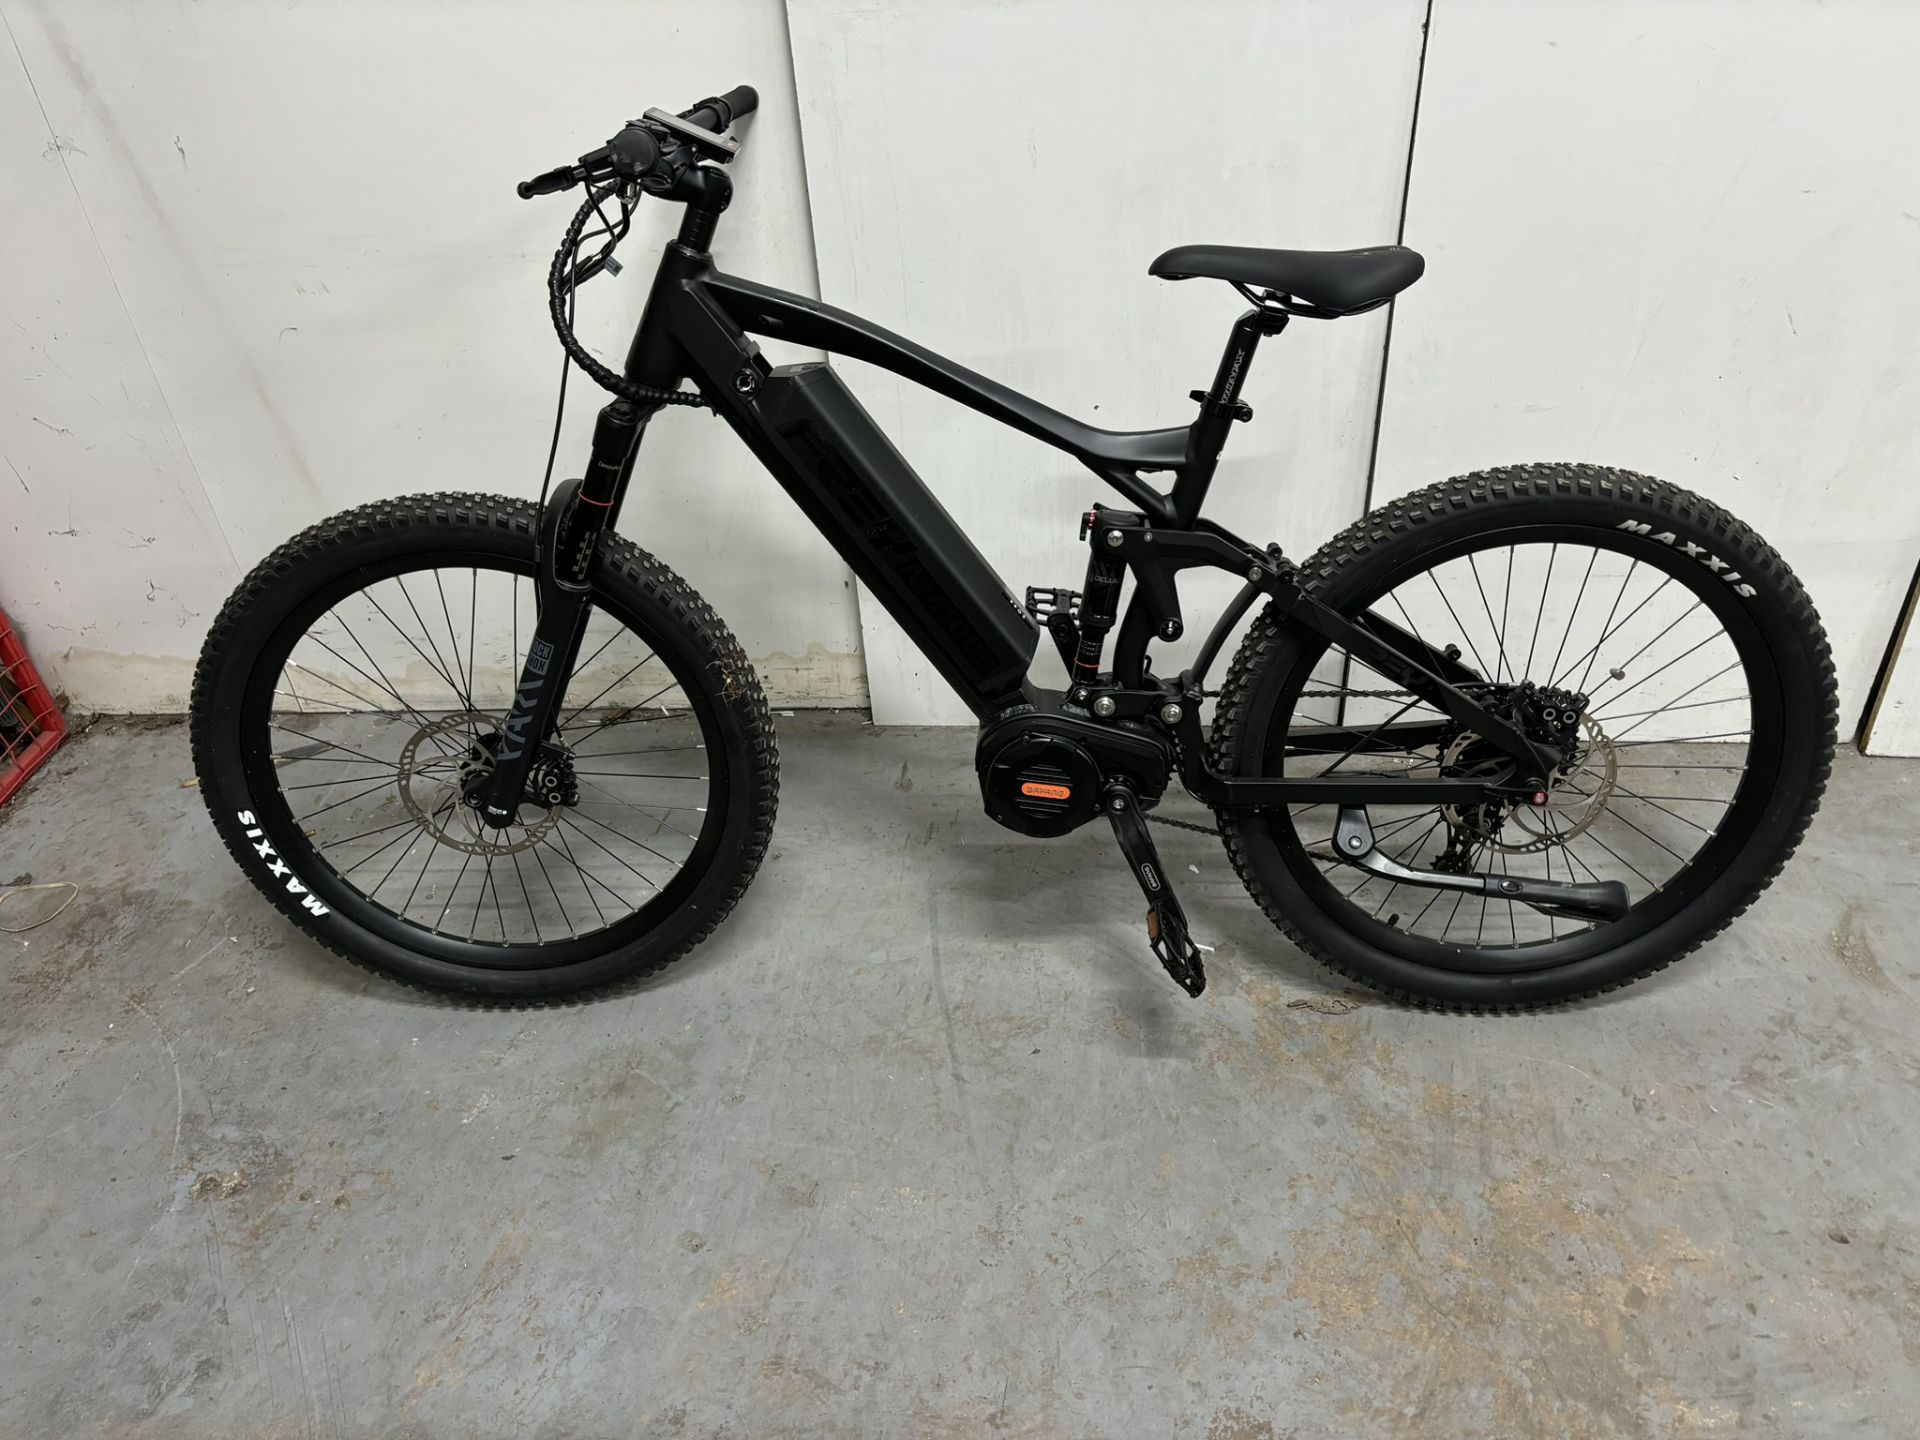 Frey Am1000 Electric Mountain Bike, Large Frame *No Charger* - Image 2 of 21